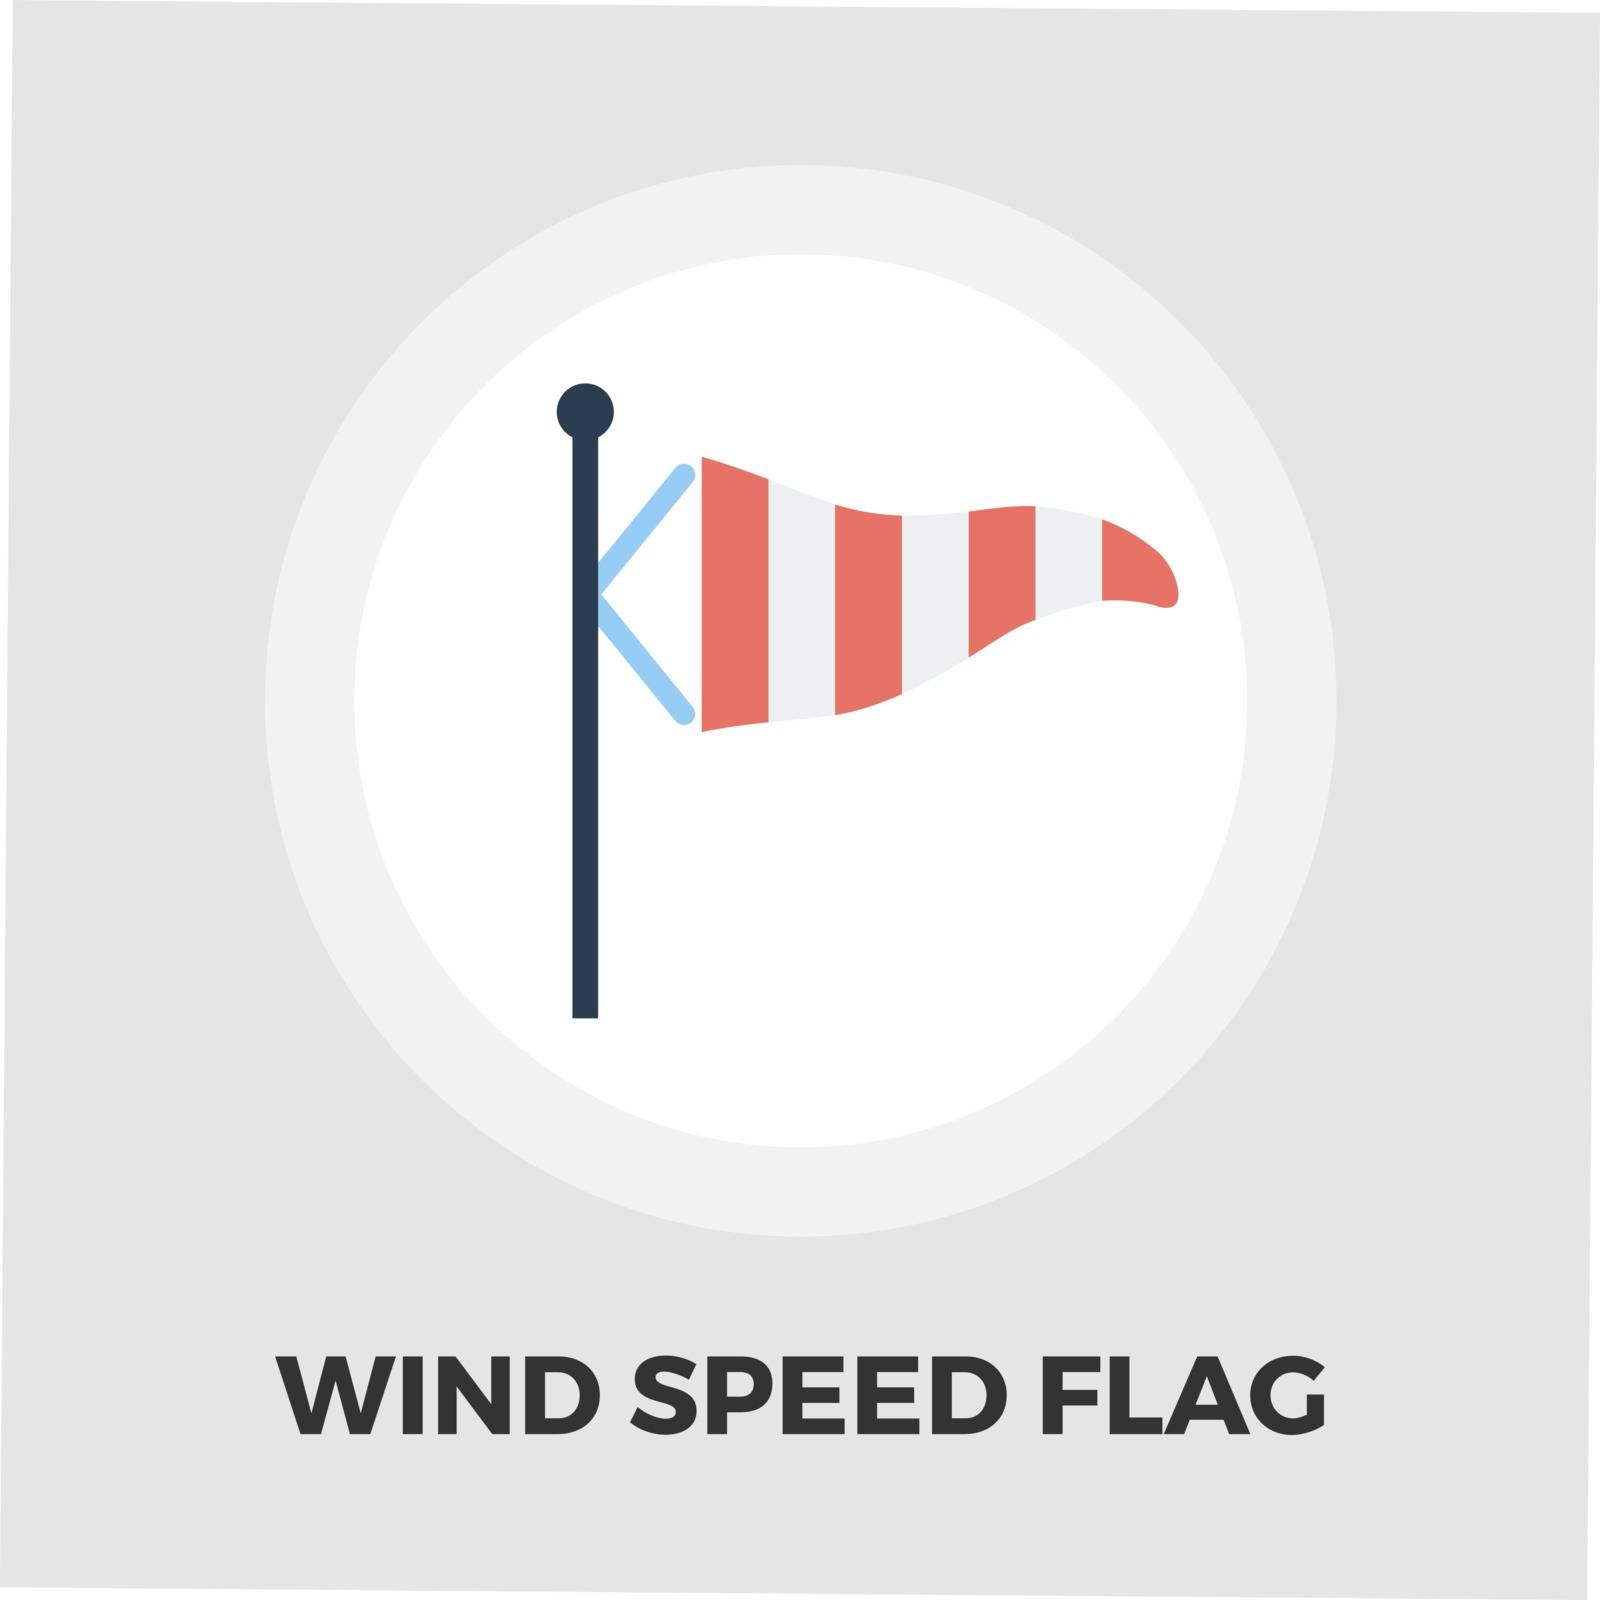 Wind Speed Flag icon vector. Flat icon isolated on the white background. Editable EPS file. Vector illustration.